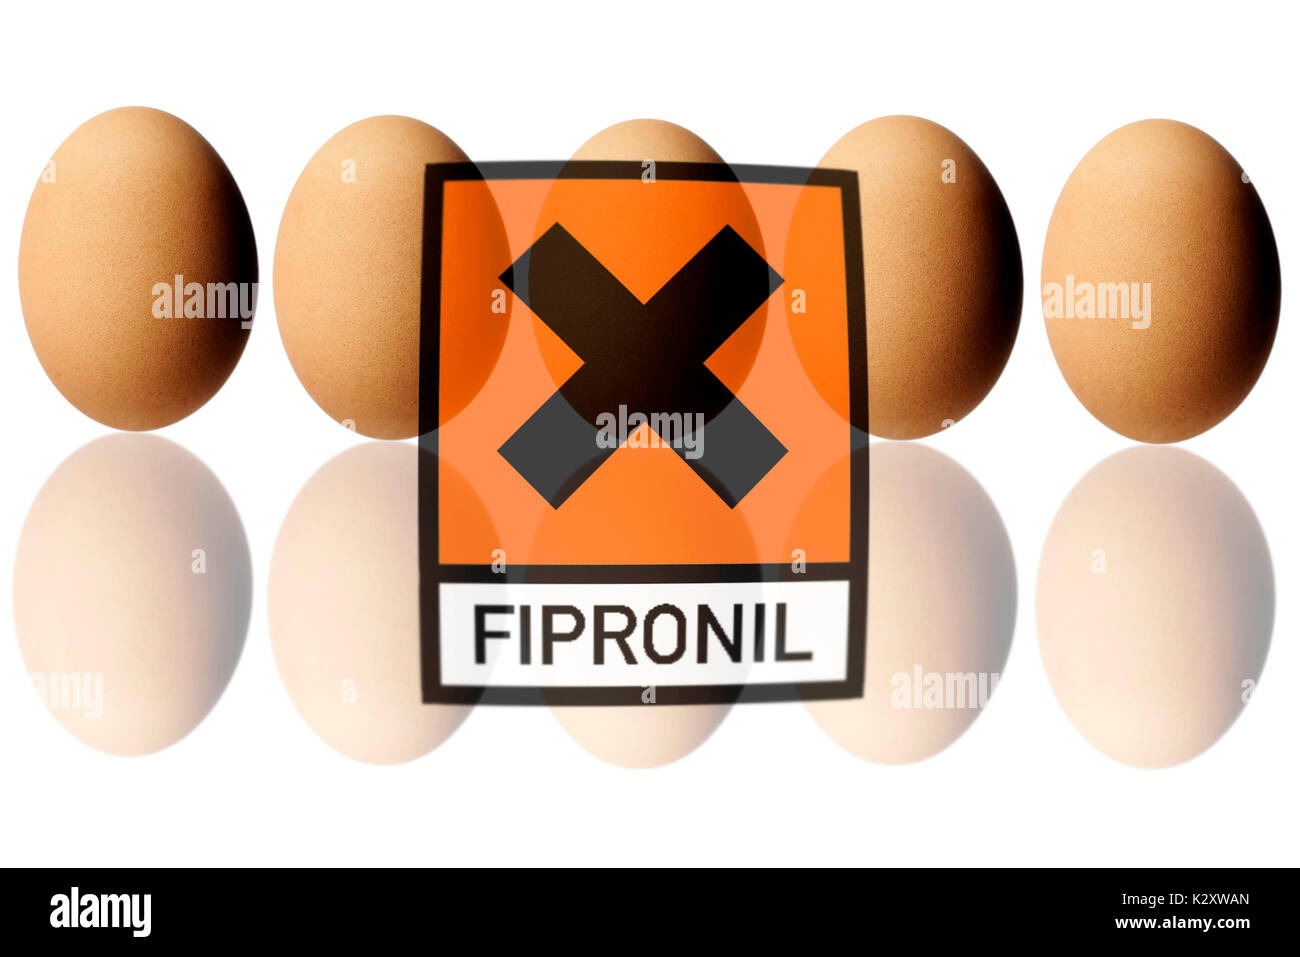 Chicken eggs with warning label, symbolic photo for Fipronil load with eggs, Huehnereier mit Warnlabel, Symbolfoto fuer Fipronil-Belastung bei Eiern Stock Photo